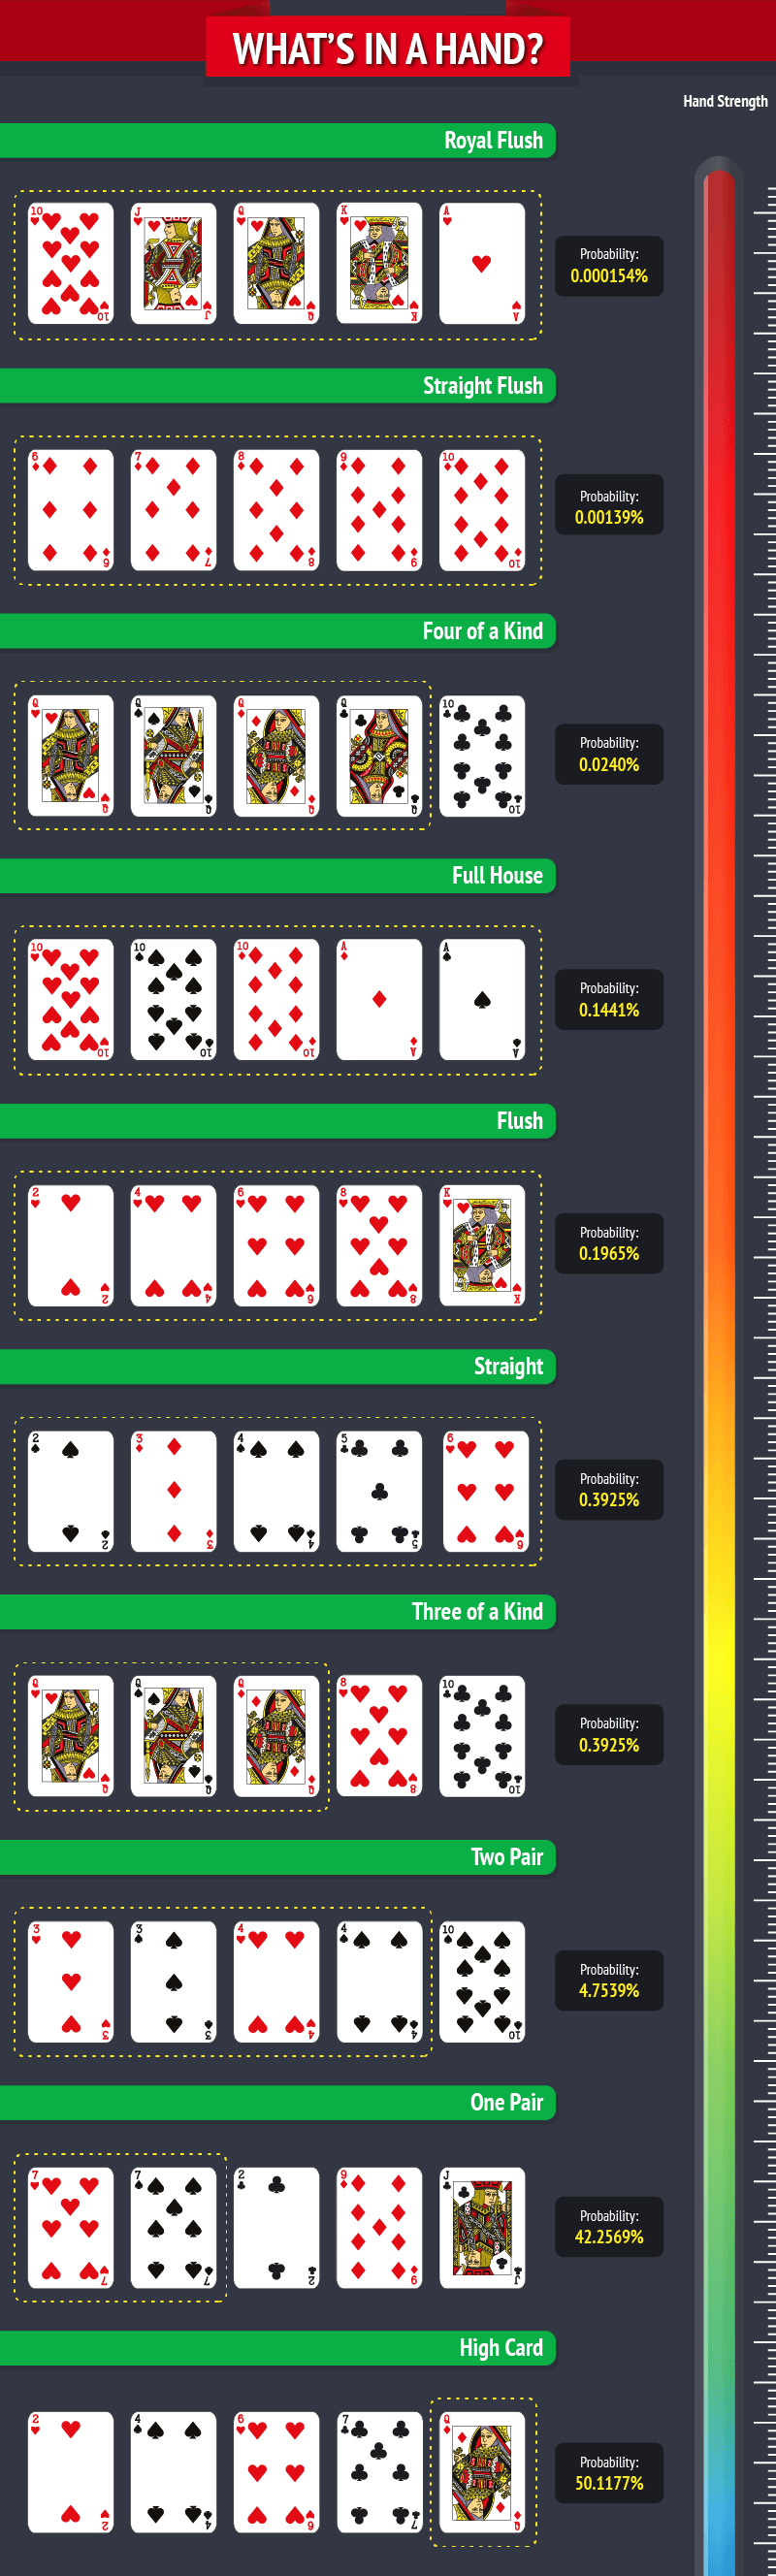 beginners-guide-to-poker-featured-hands